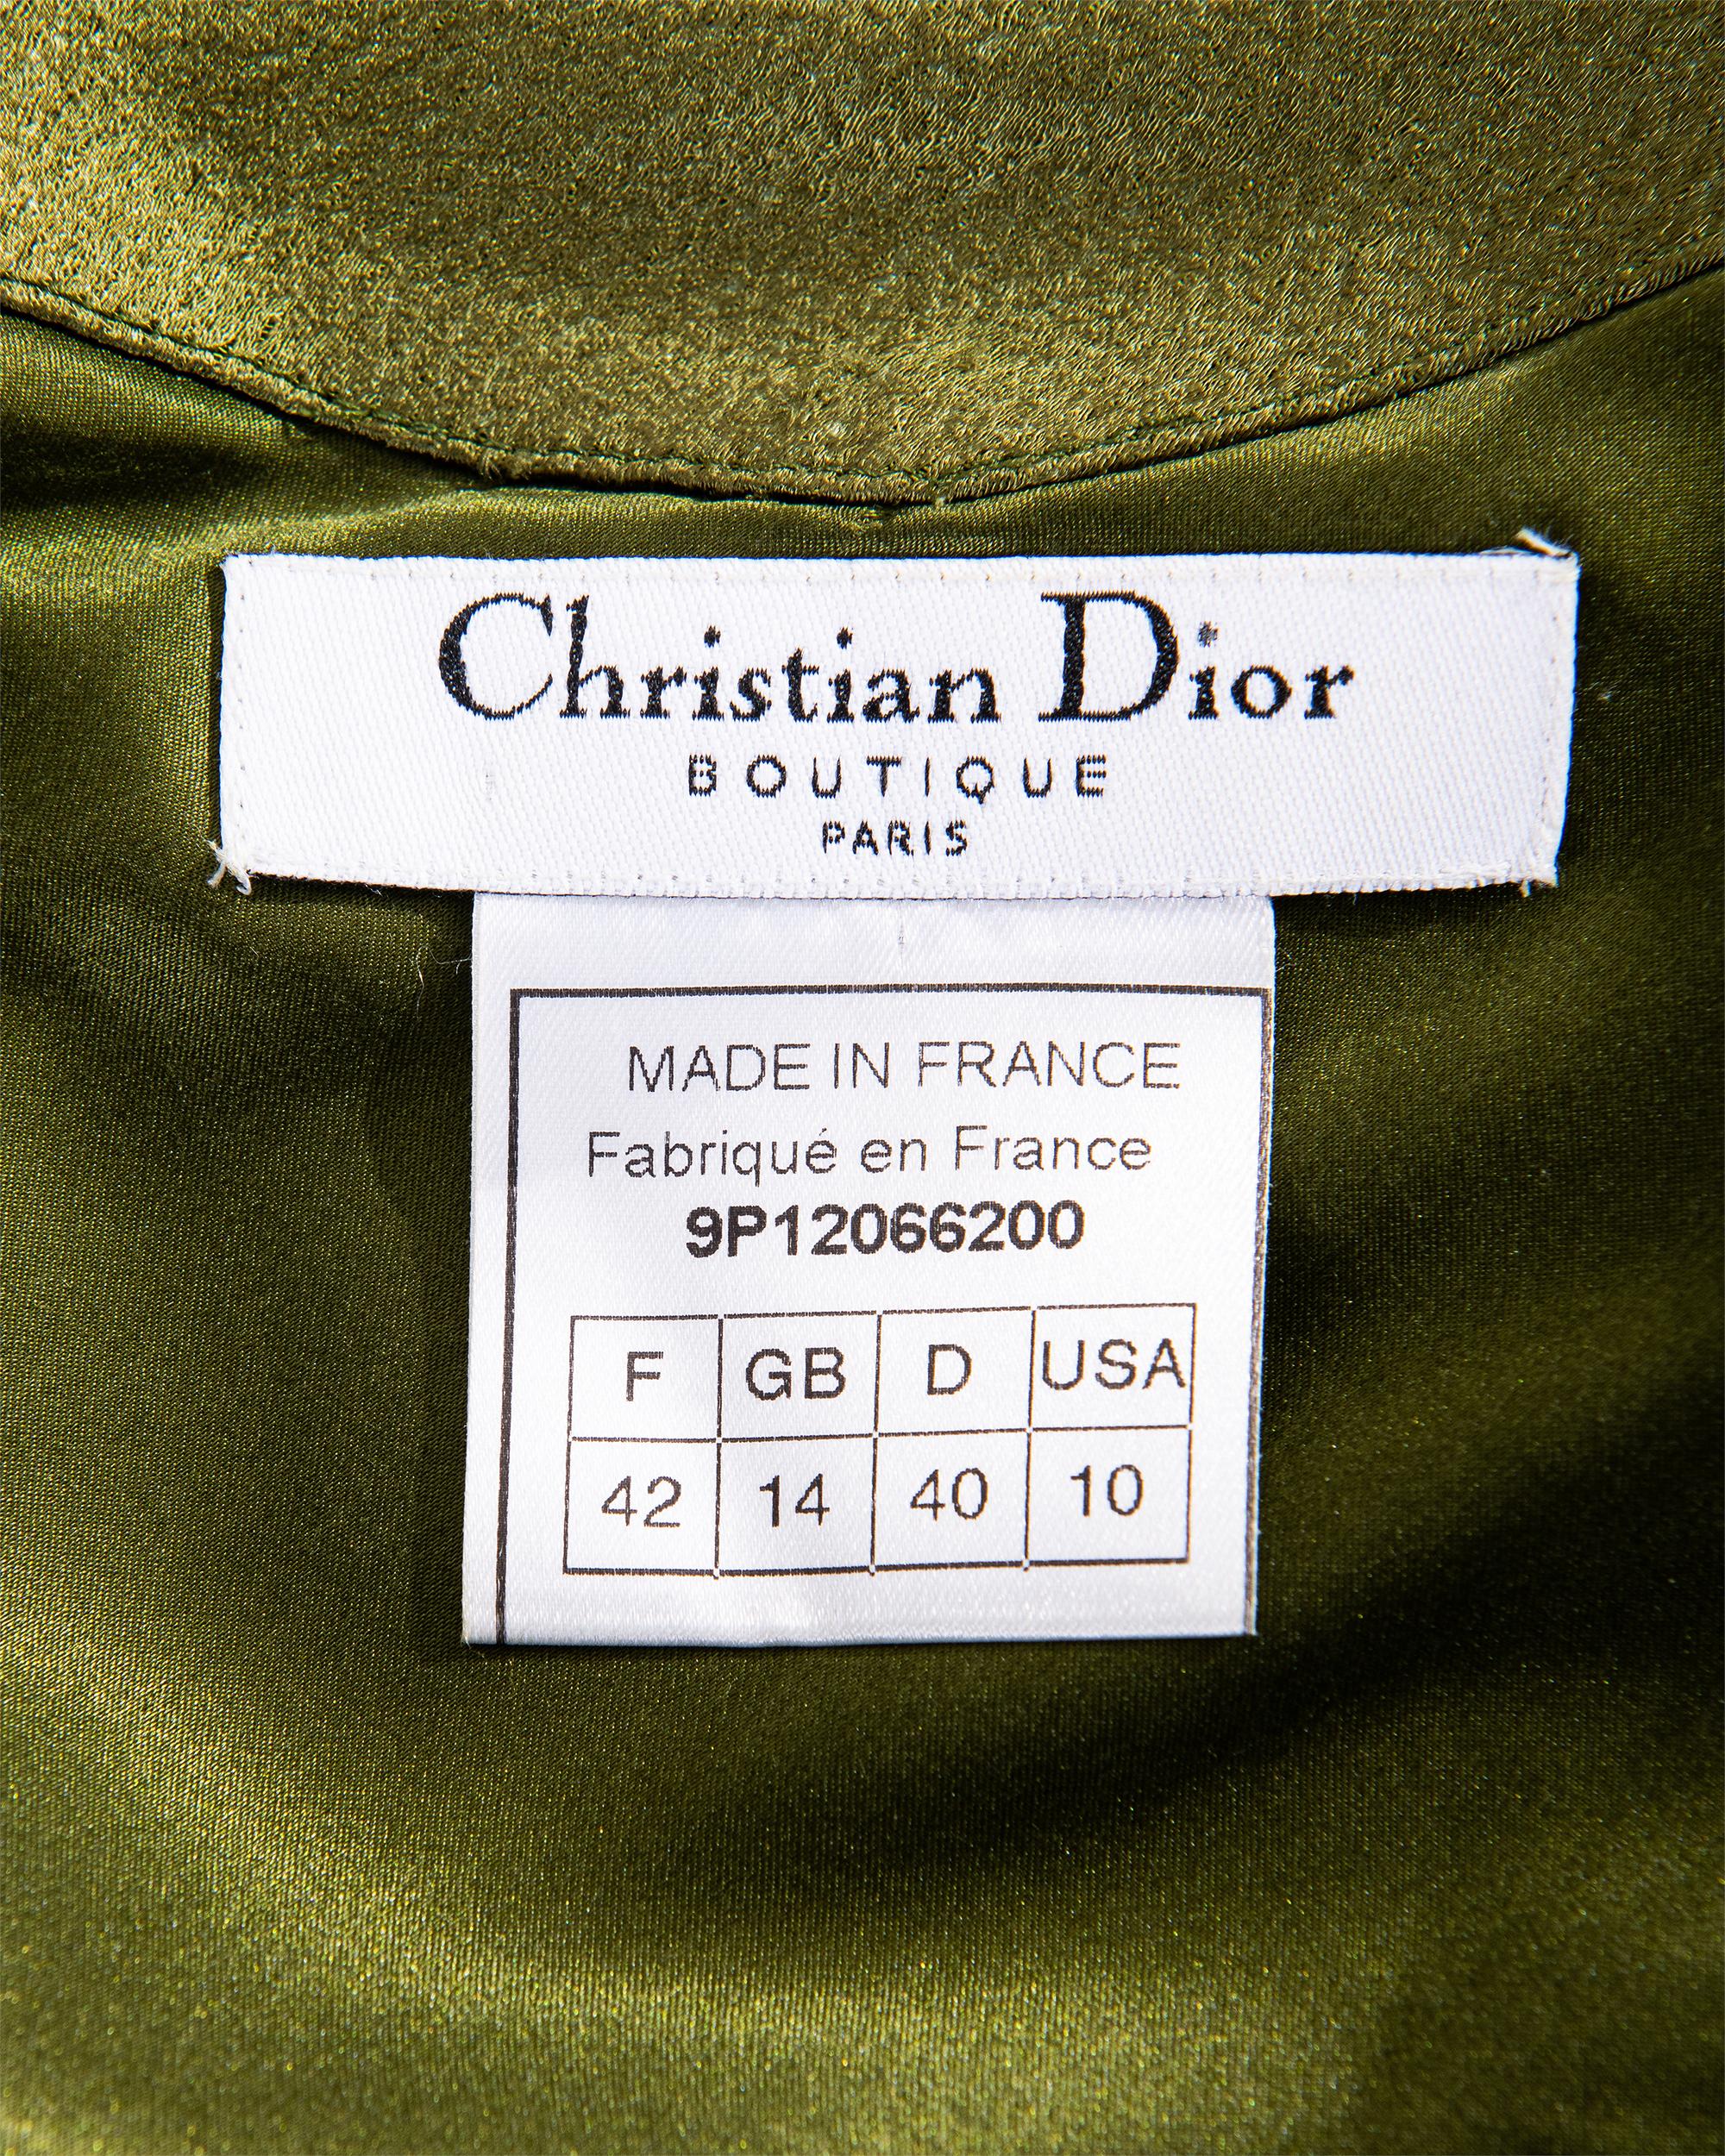 S/S 1999 Christian Dior by John Galliano Olive Green Bias Cut Slip Gown For Sale 7